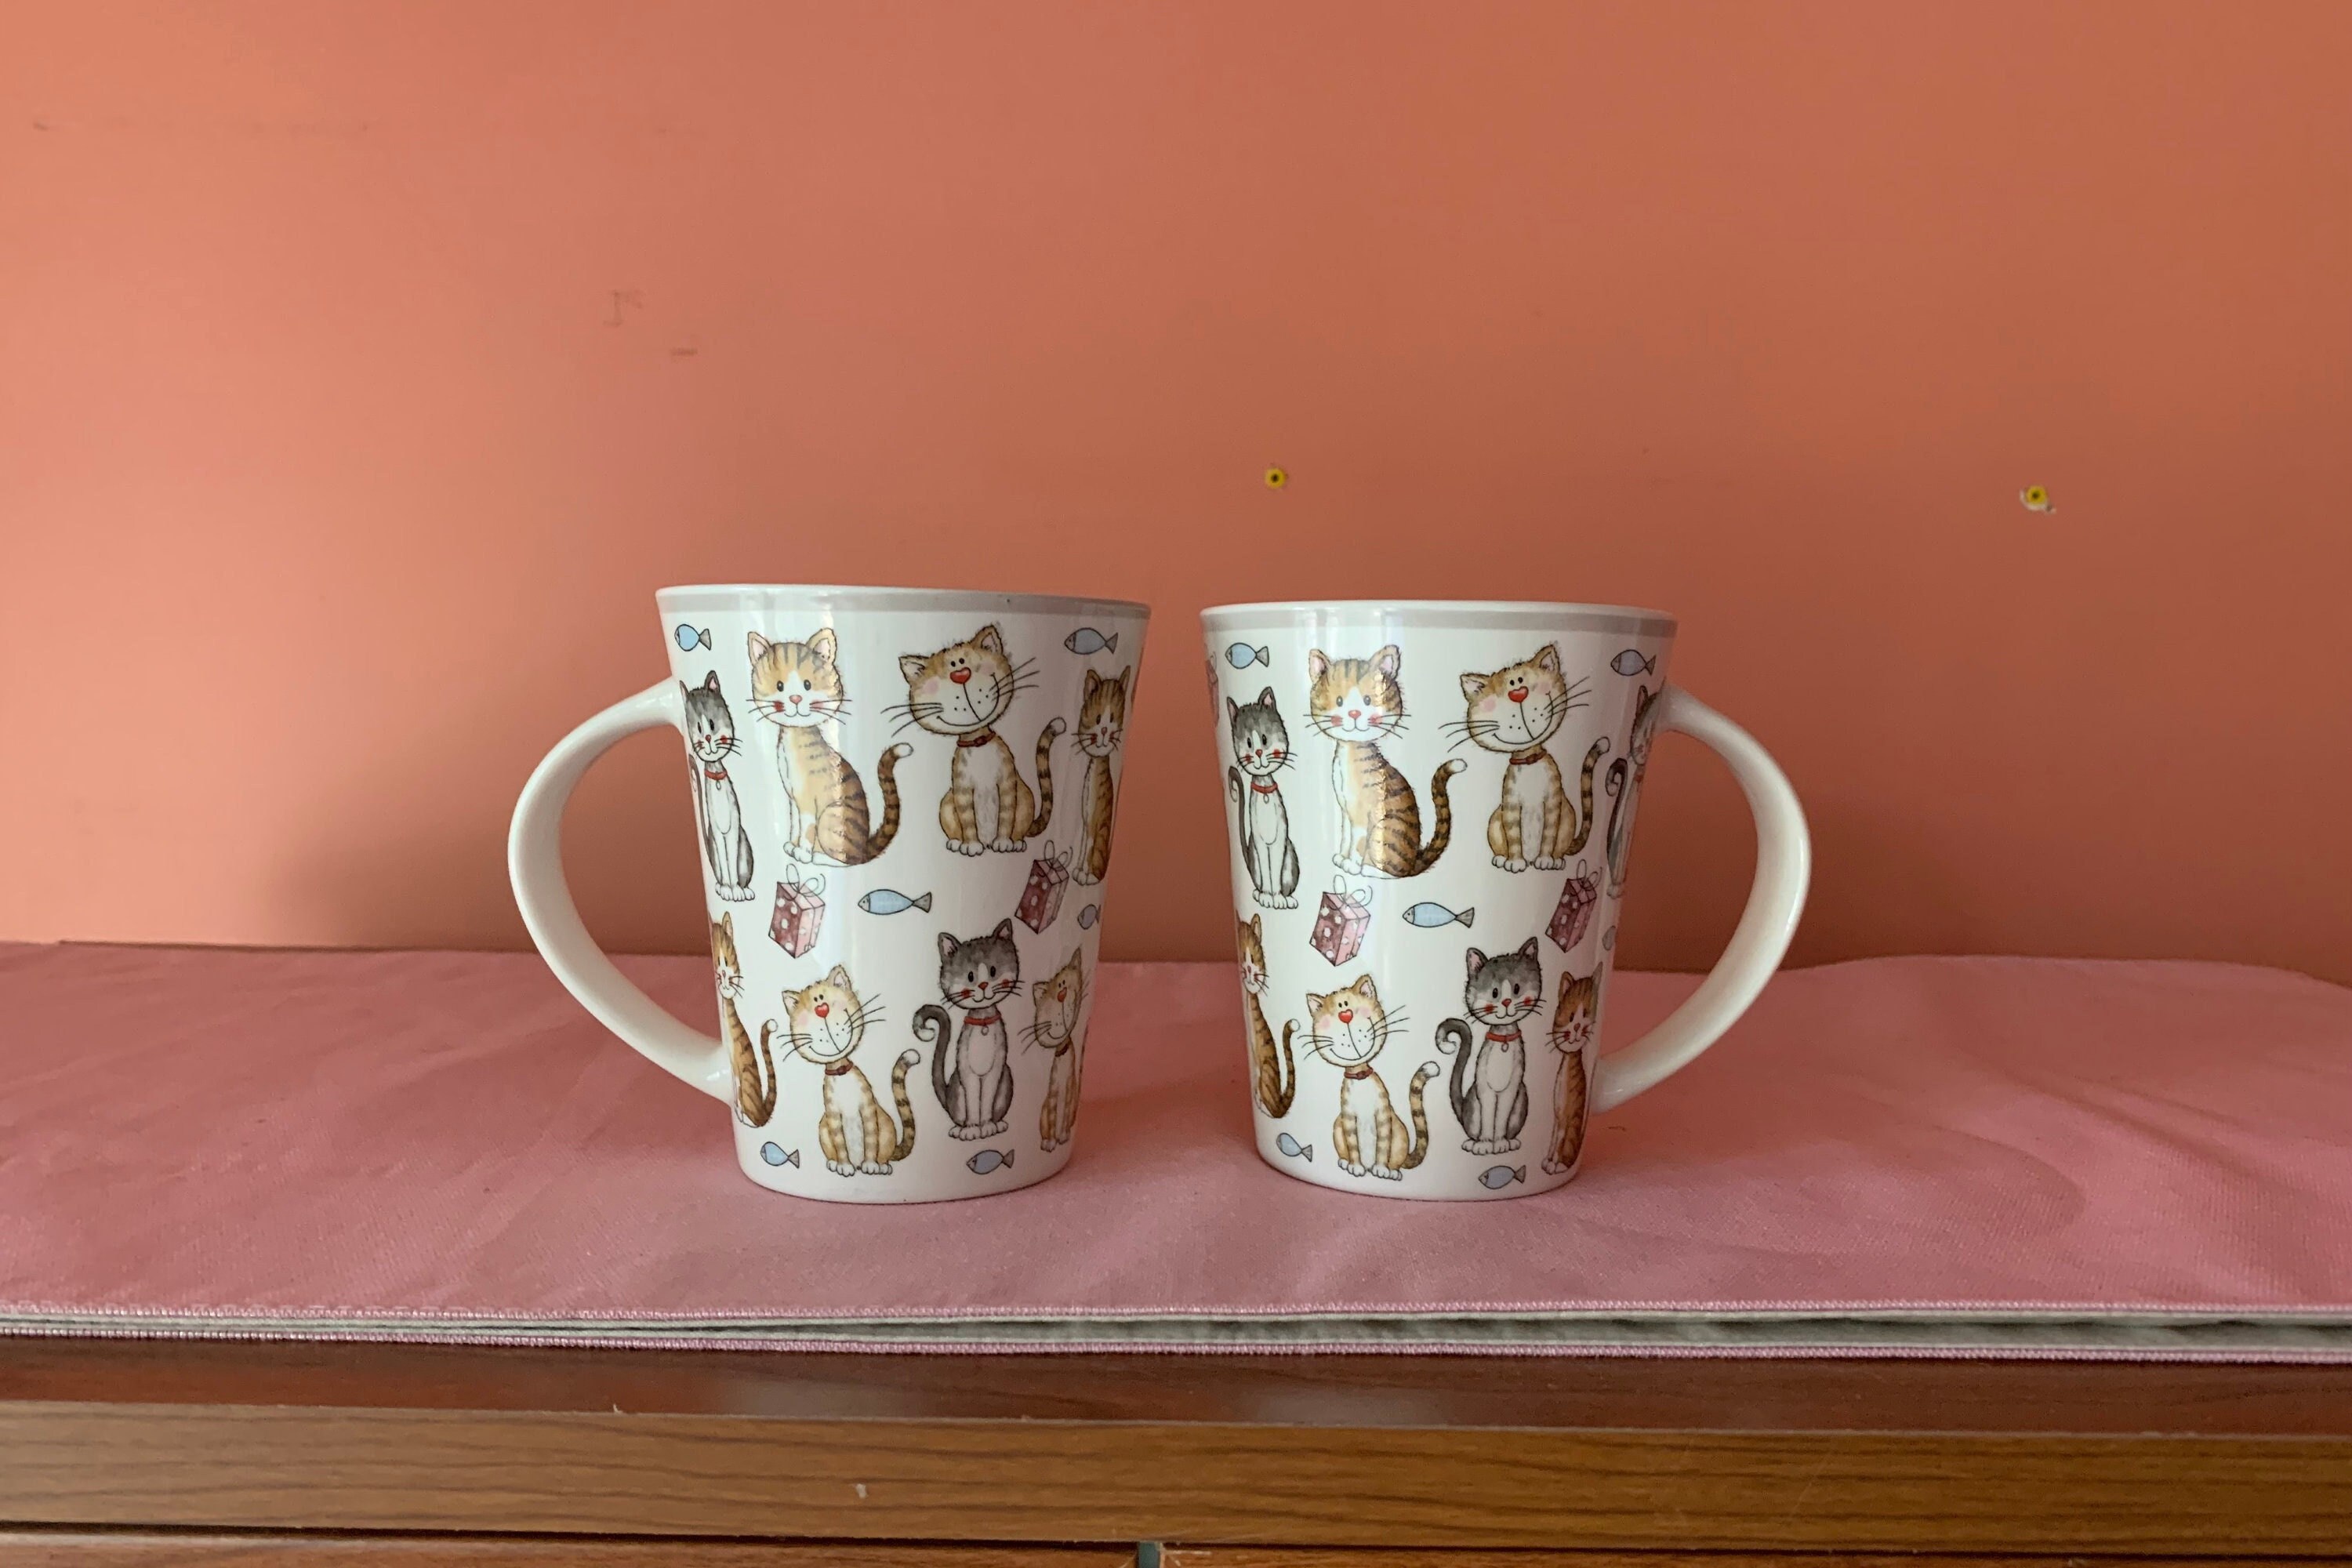 Ceramic Coffee Mug,Cute Cat Handmade Tea Cups, with Lid and Stainless Steel Spoon,Unique Hot Chocolate Novelty Mugs, Christmas, Birthday for Girls